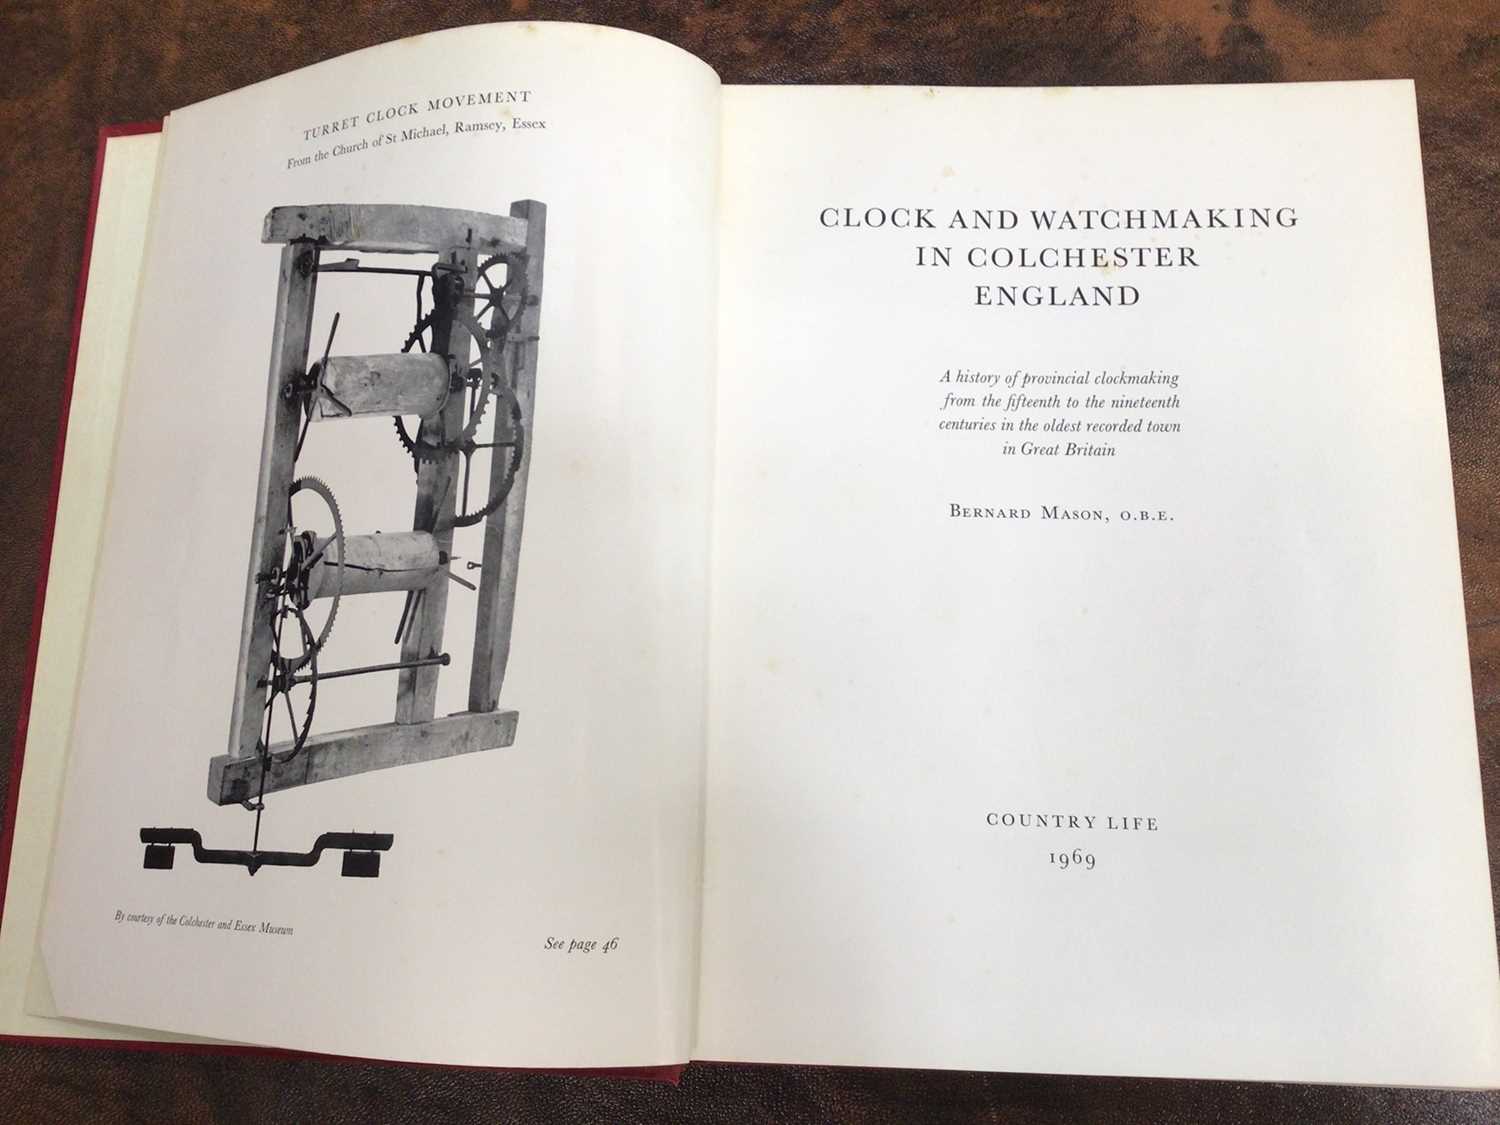 Bernard Mason, Clock and Watchmaking in Colchester, 1969 first edition, cloth binding